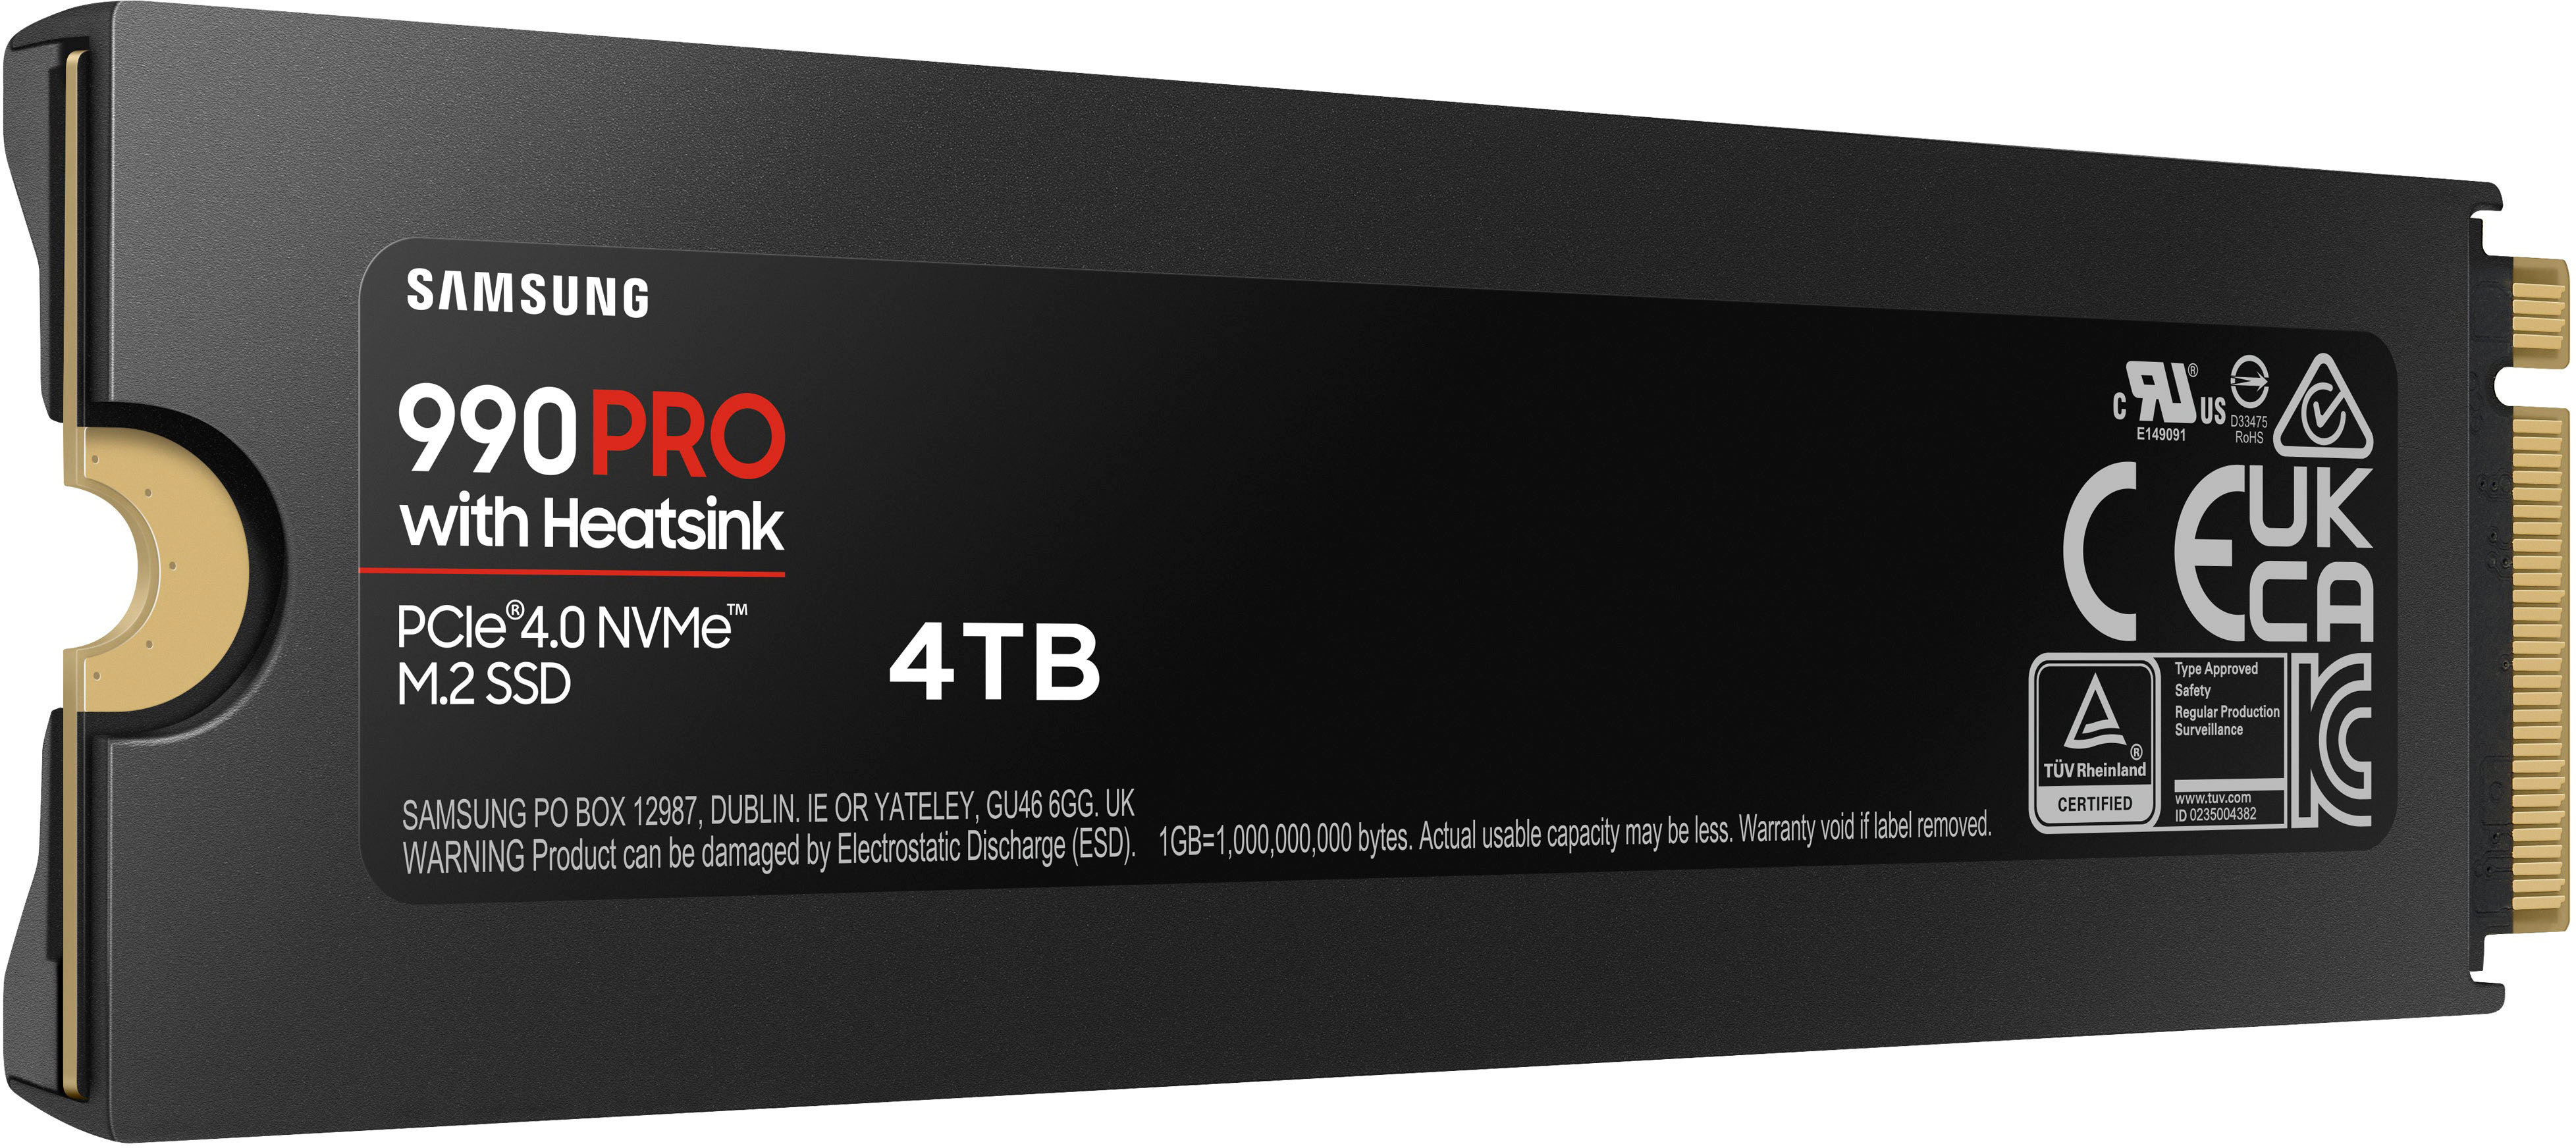 The ultra fast Samsung 990 Pro SSD is down to its lowest price yet